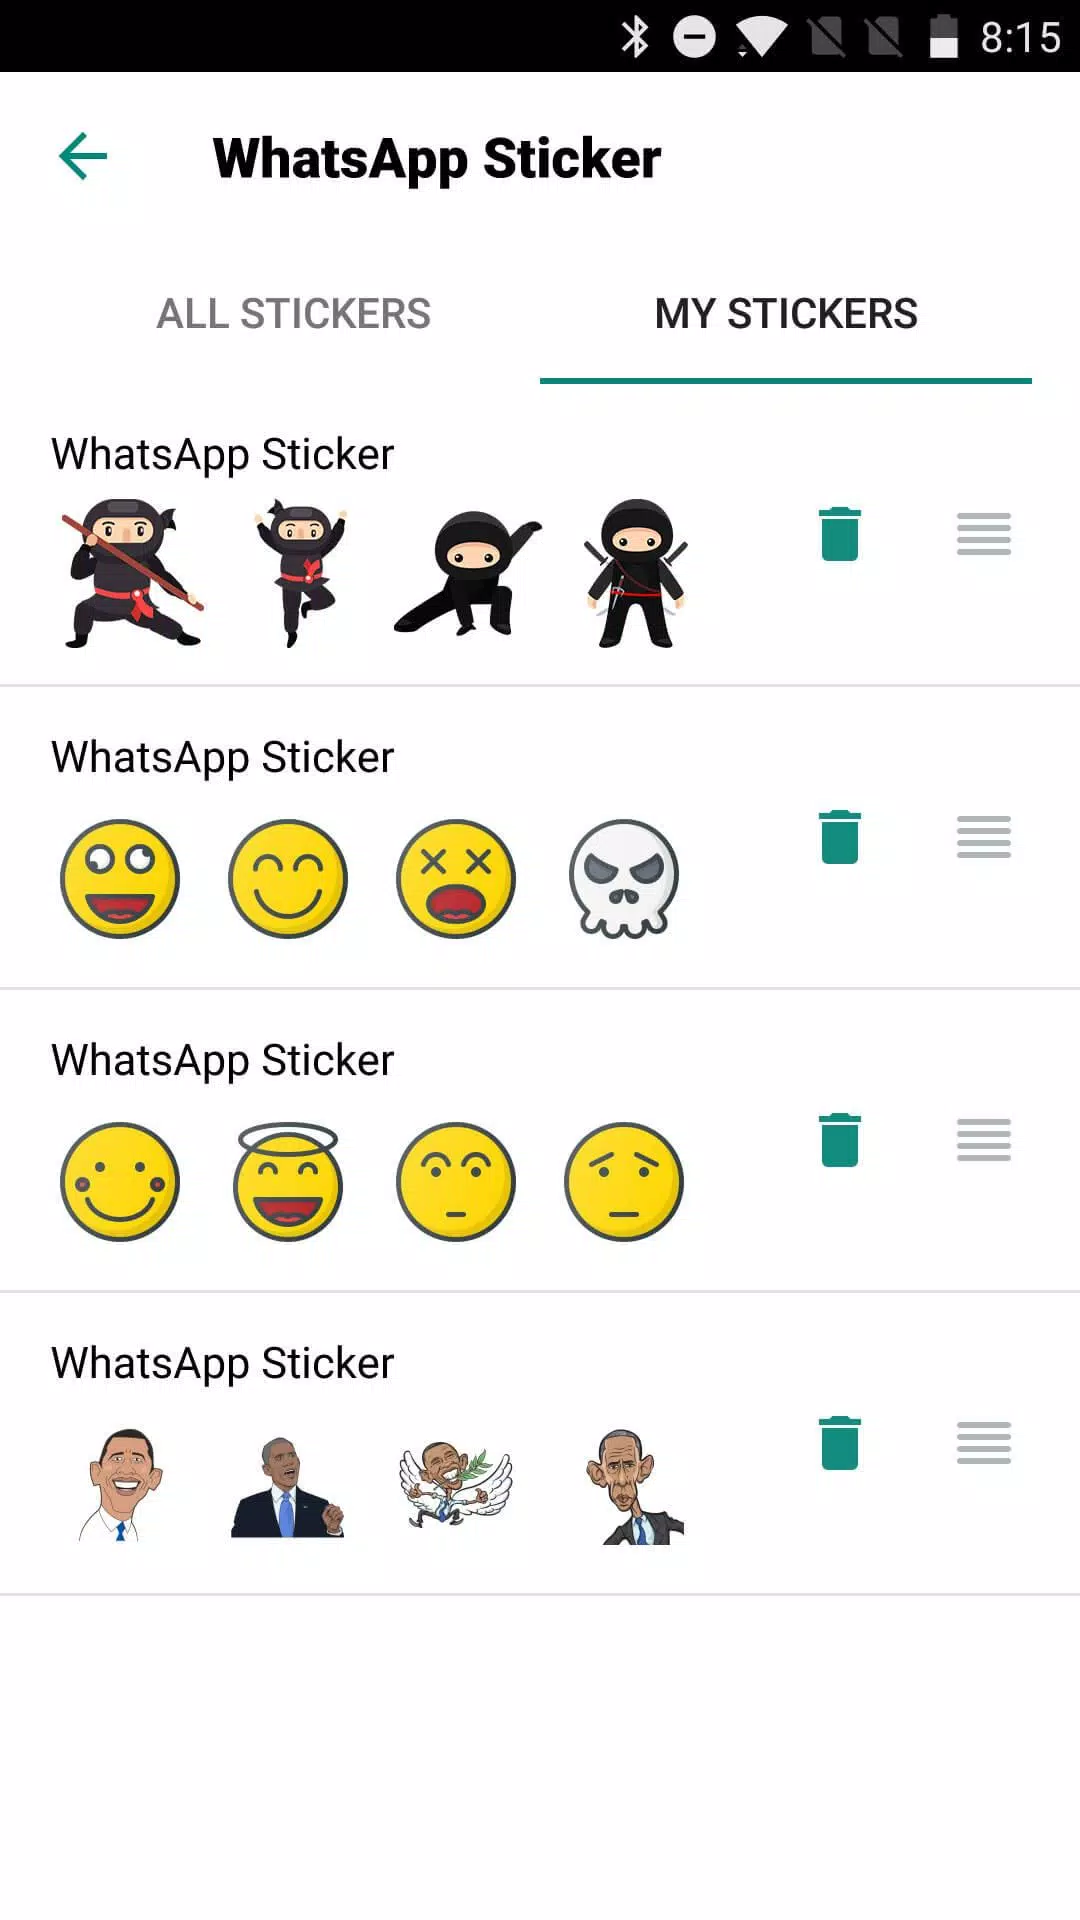 Messenger From Facebook: How to Use the Subway Surfers Sticker Pack